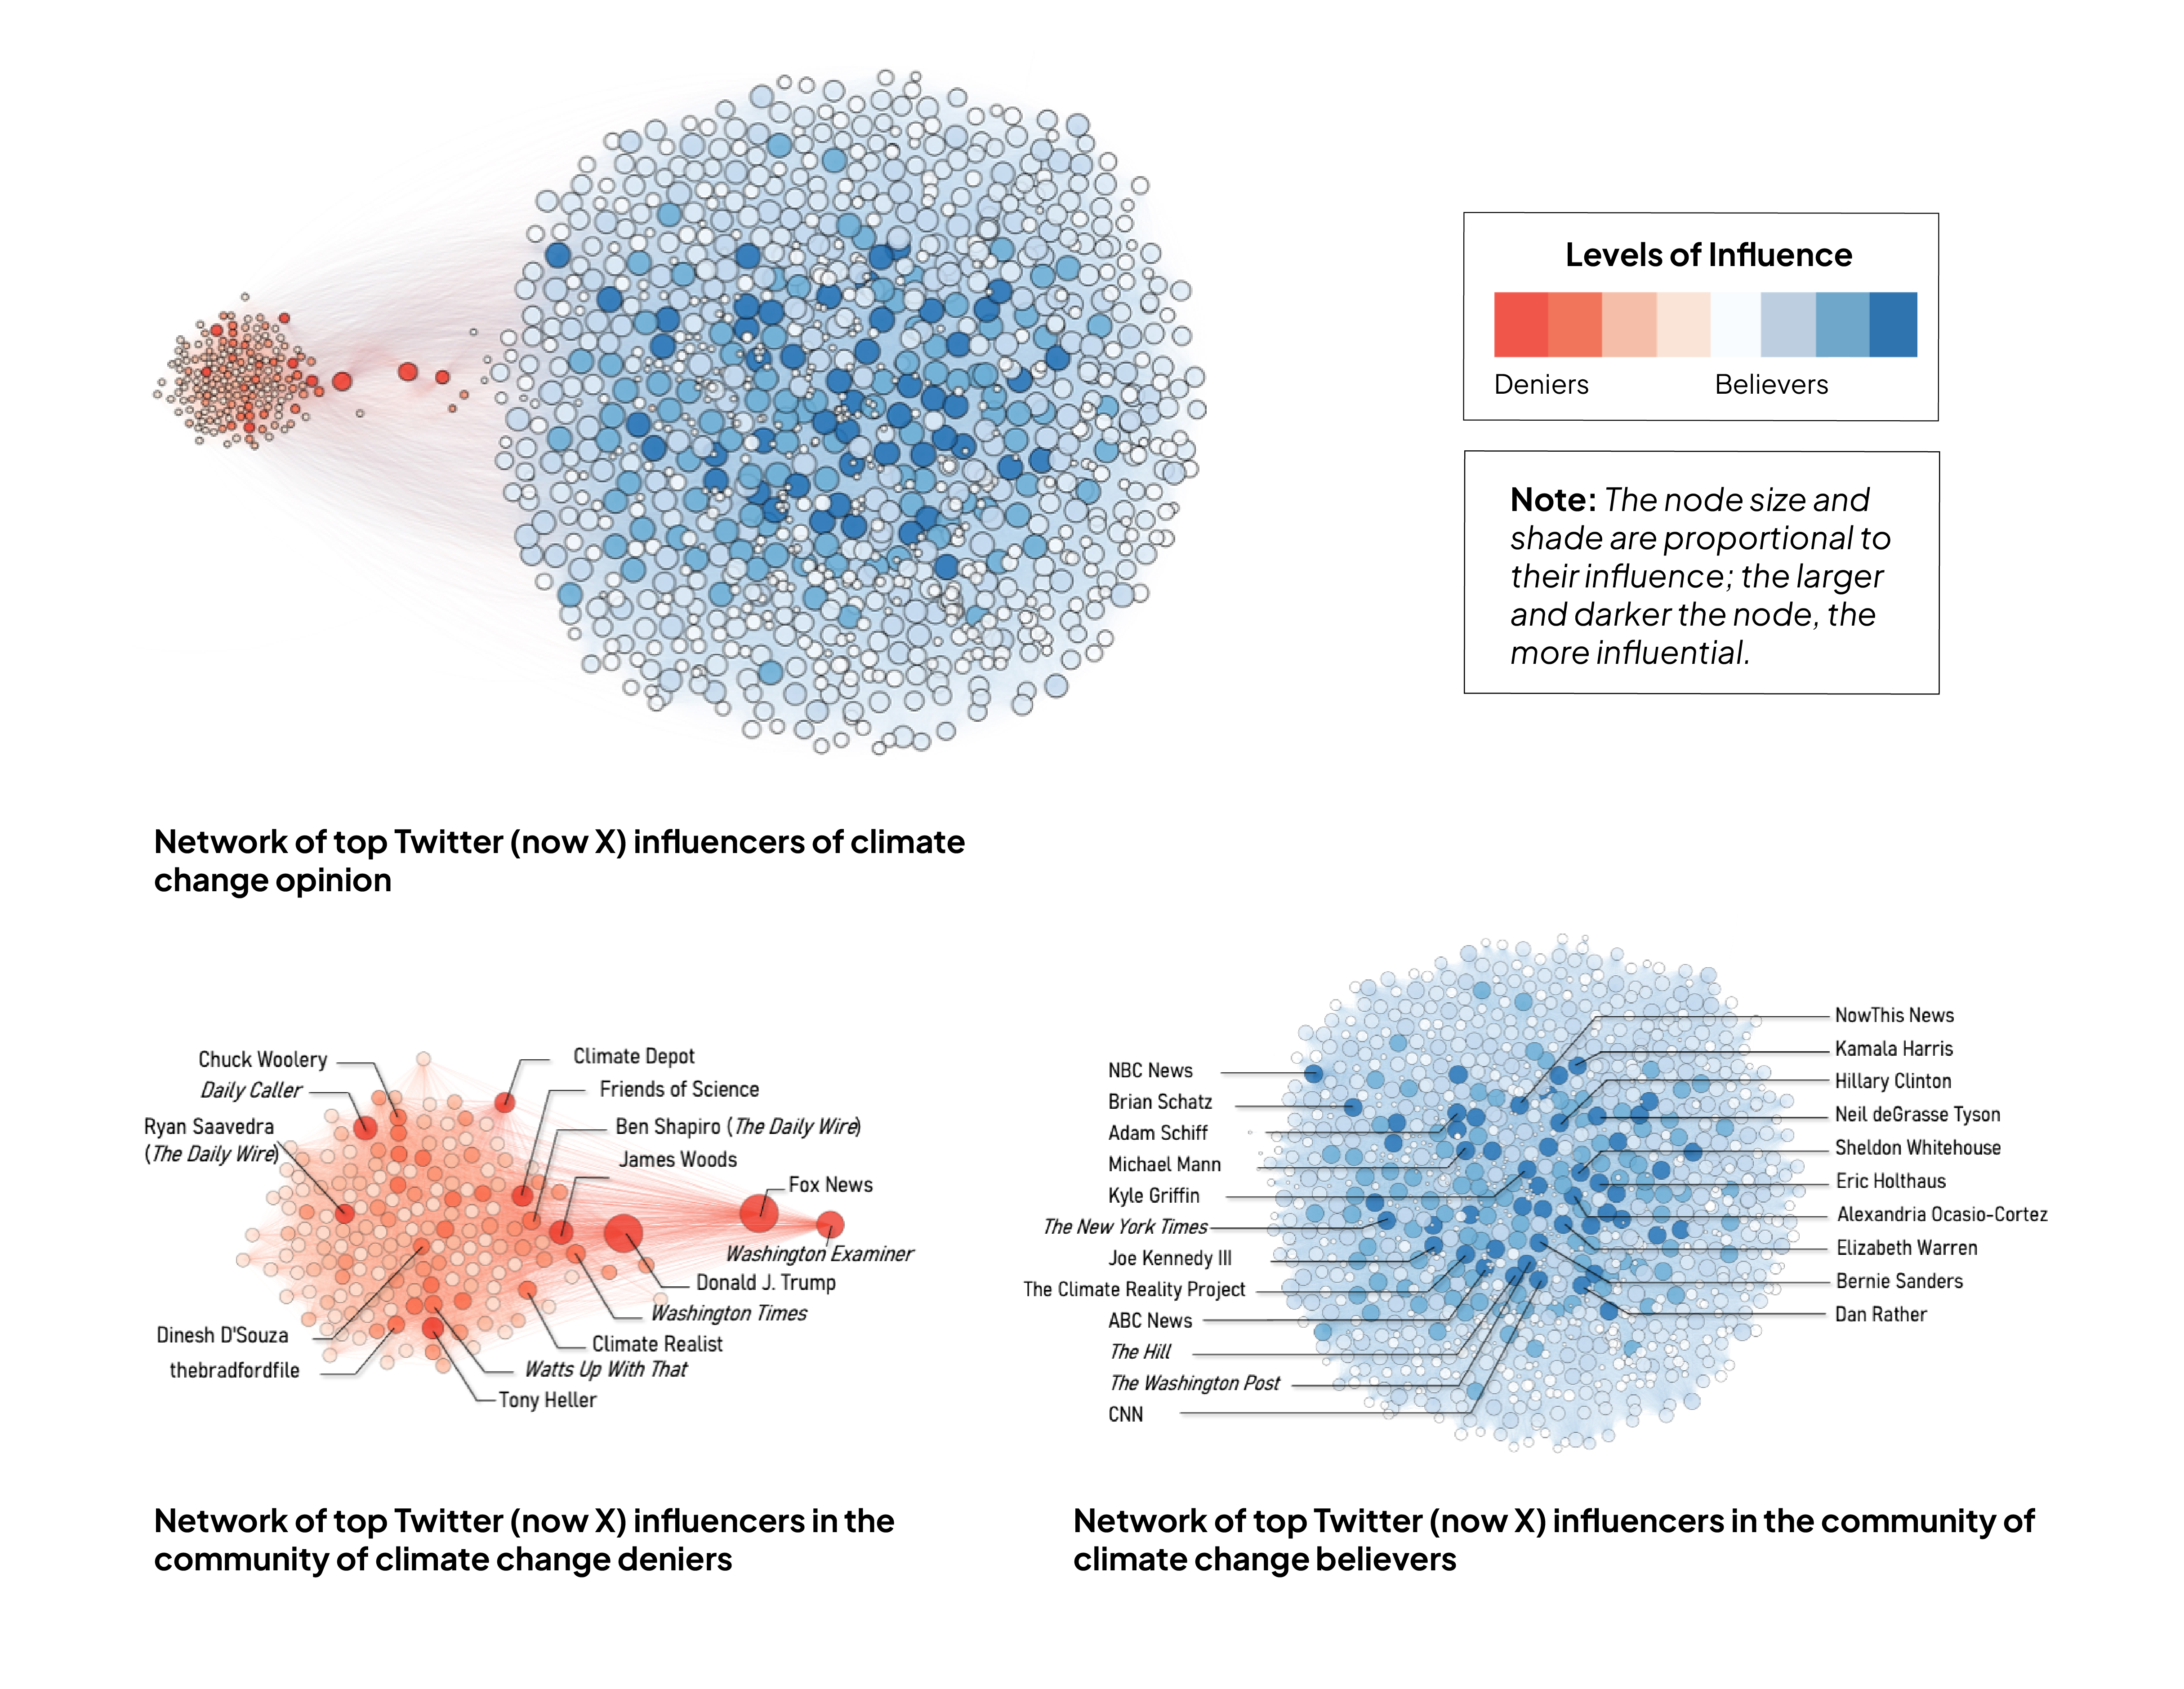 Network of top Twitter (now X) influencers of climate change opinion.